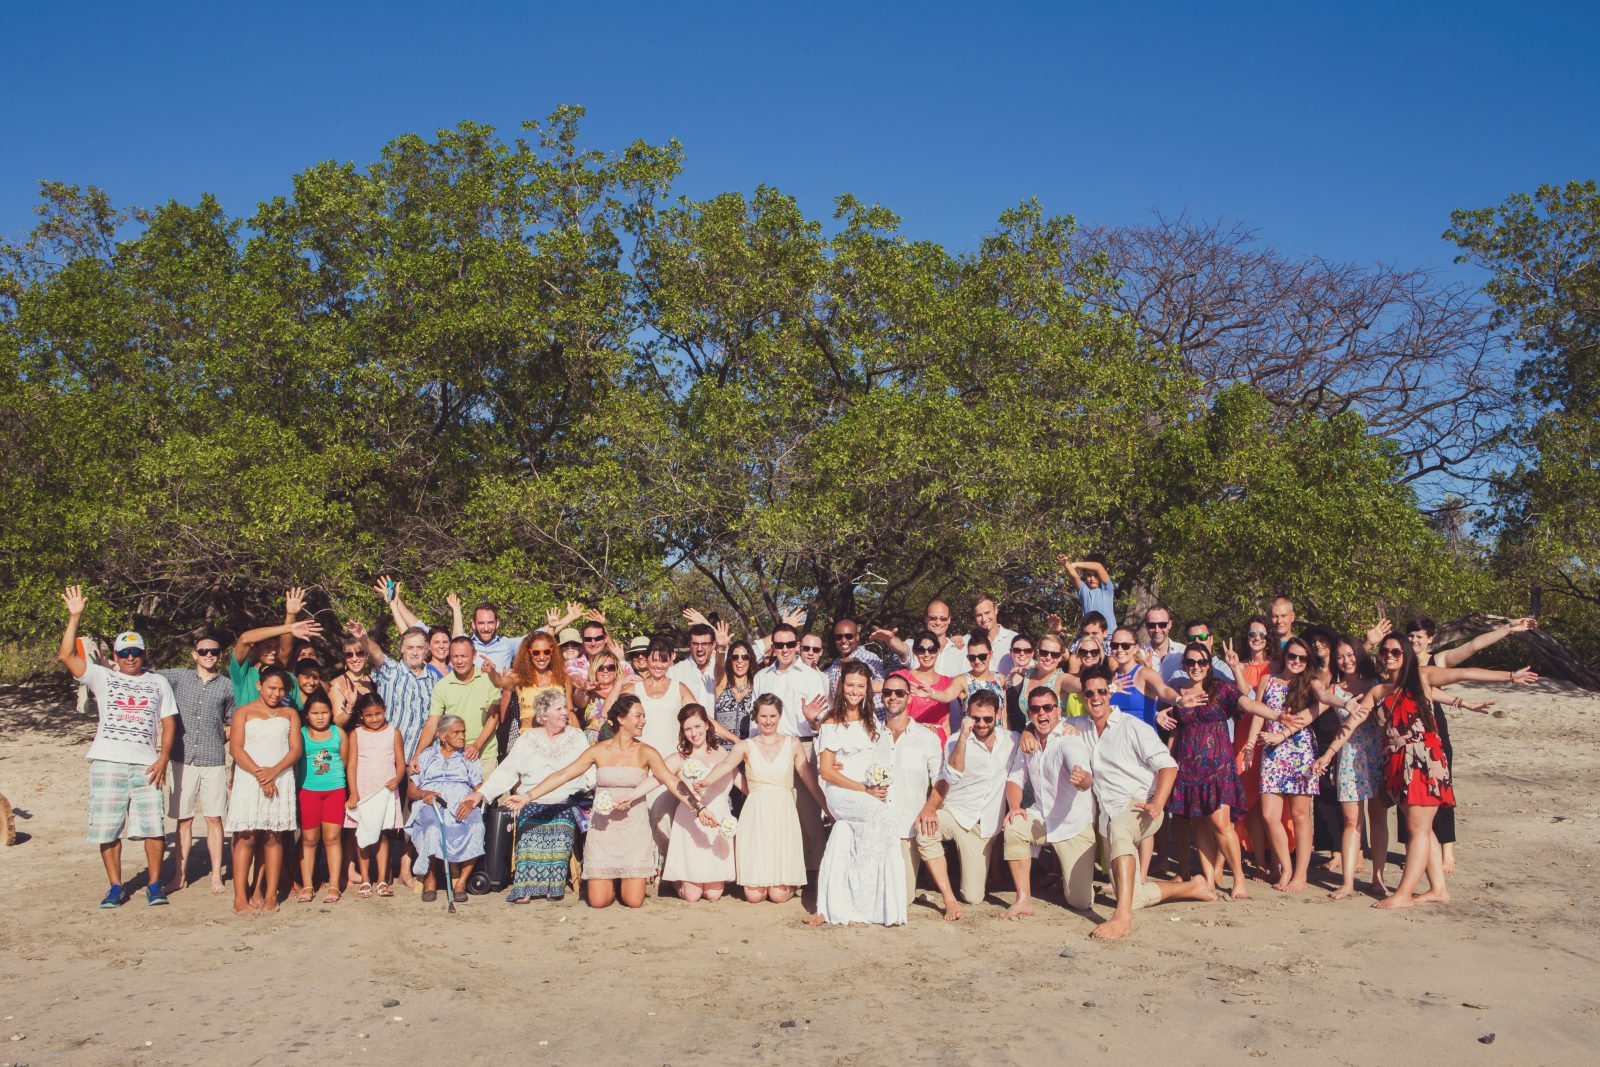 Friends and family at our wedding. Costa Rica